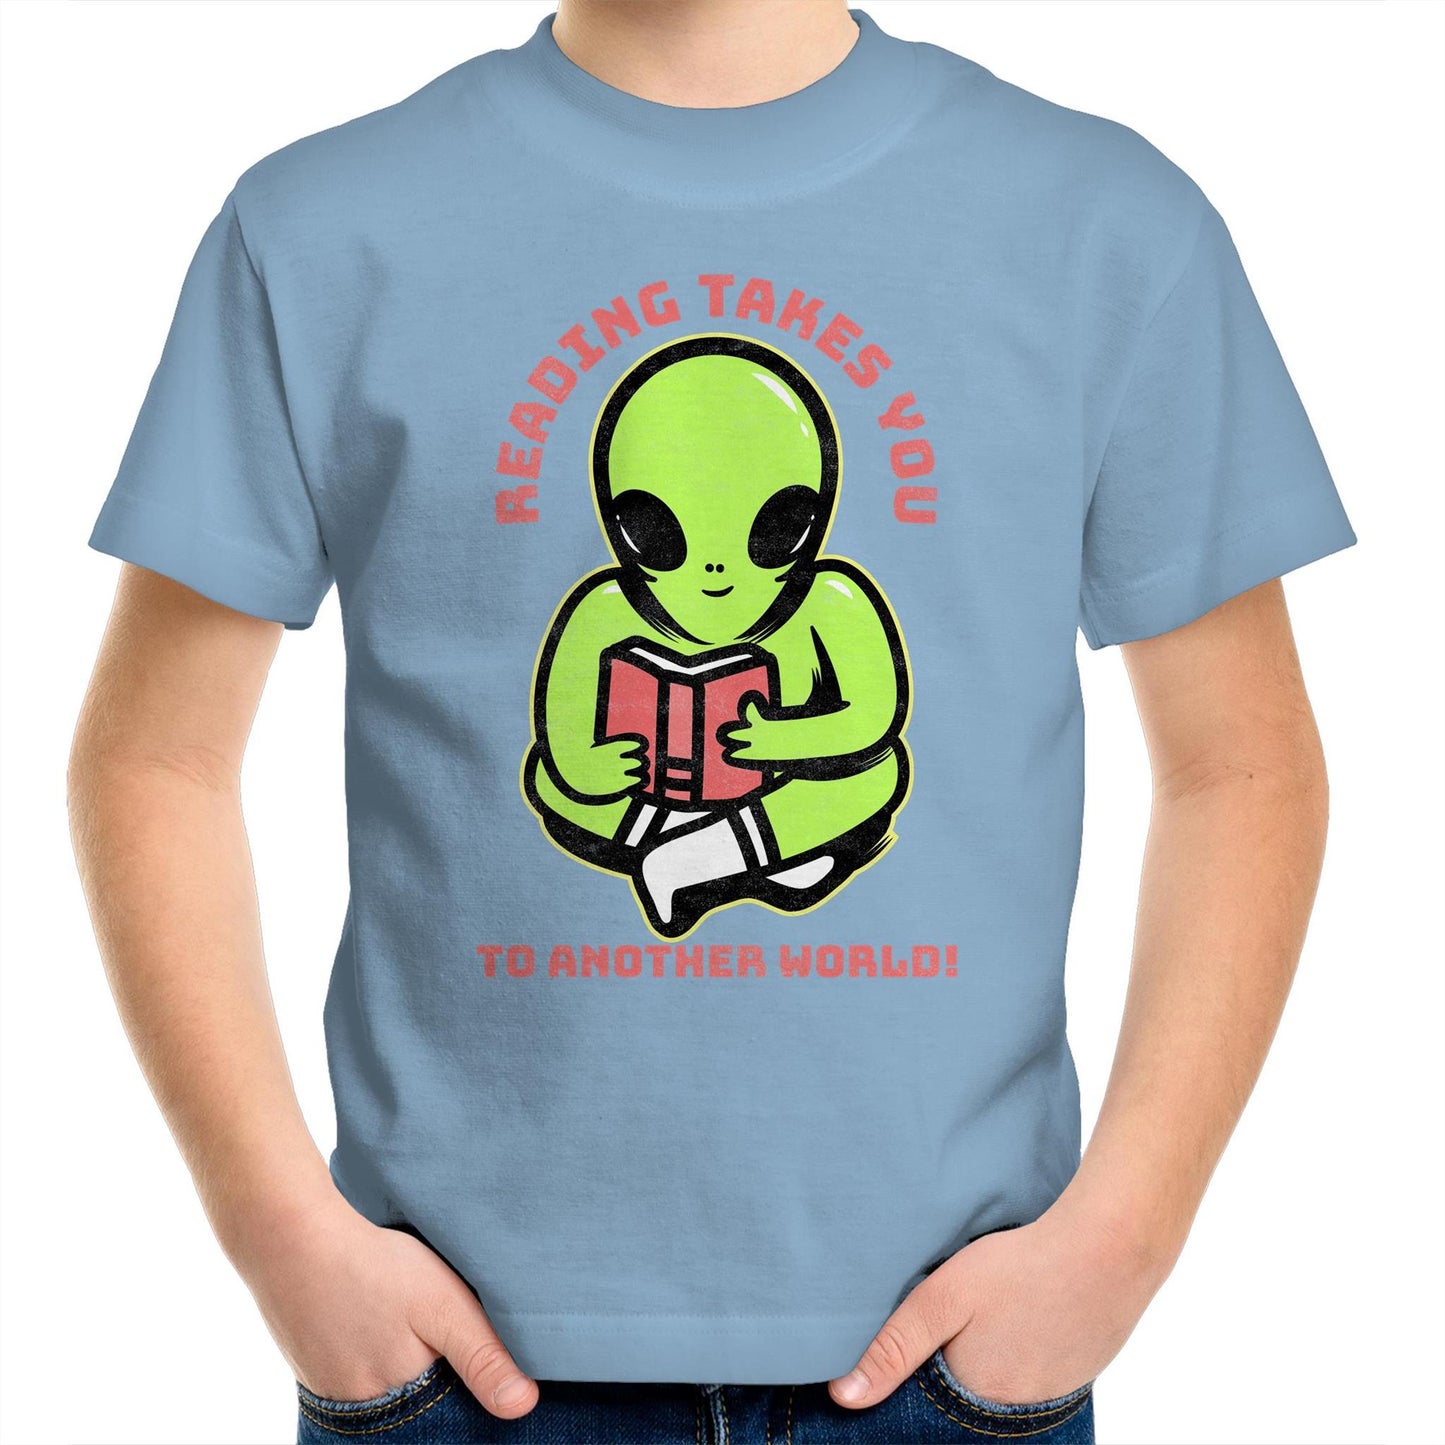 Reading Takes You To Another World, Alien - Kids Youth T-Shirt Carolina Blue Kids Youth T-shirt Reading Sci Fi